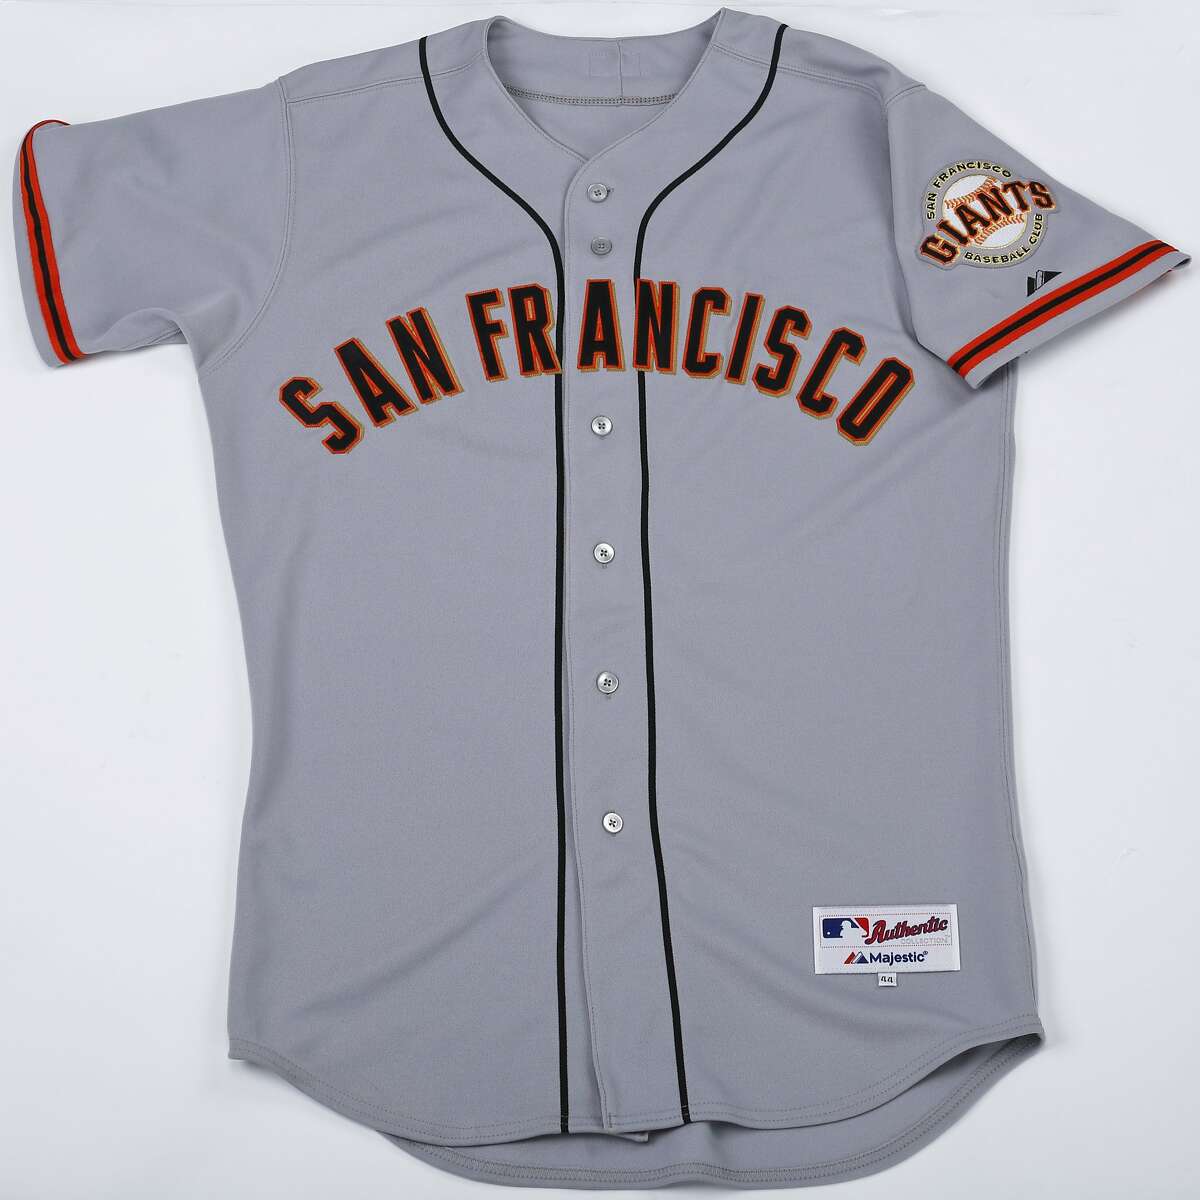 official san francisco giants jersey